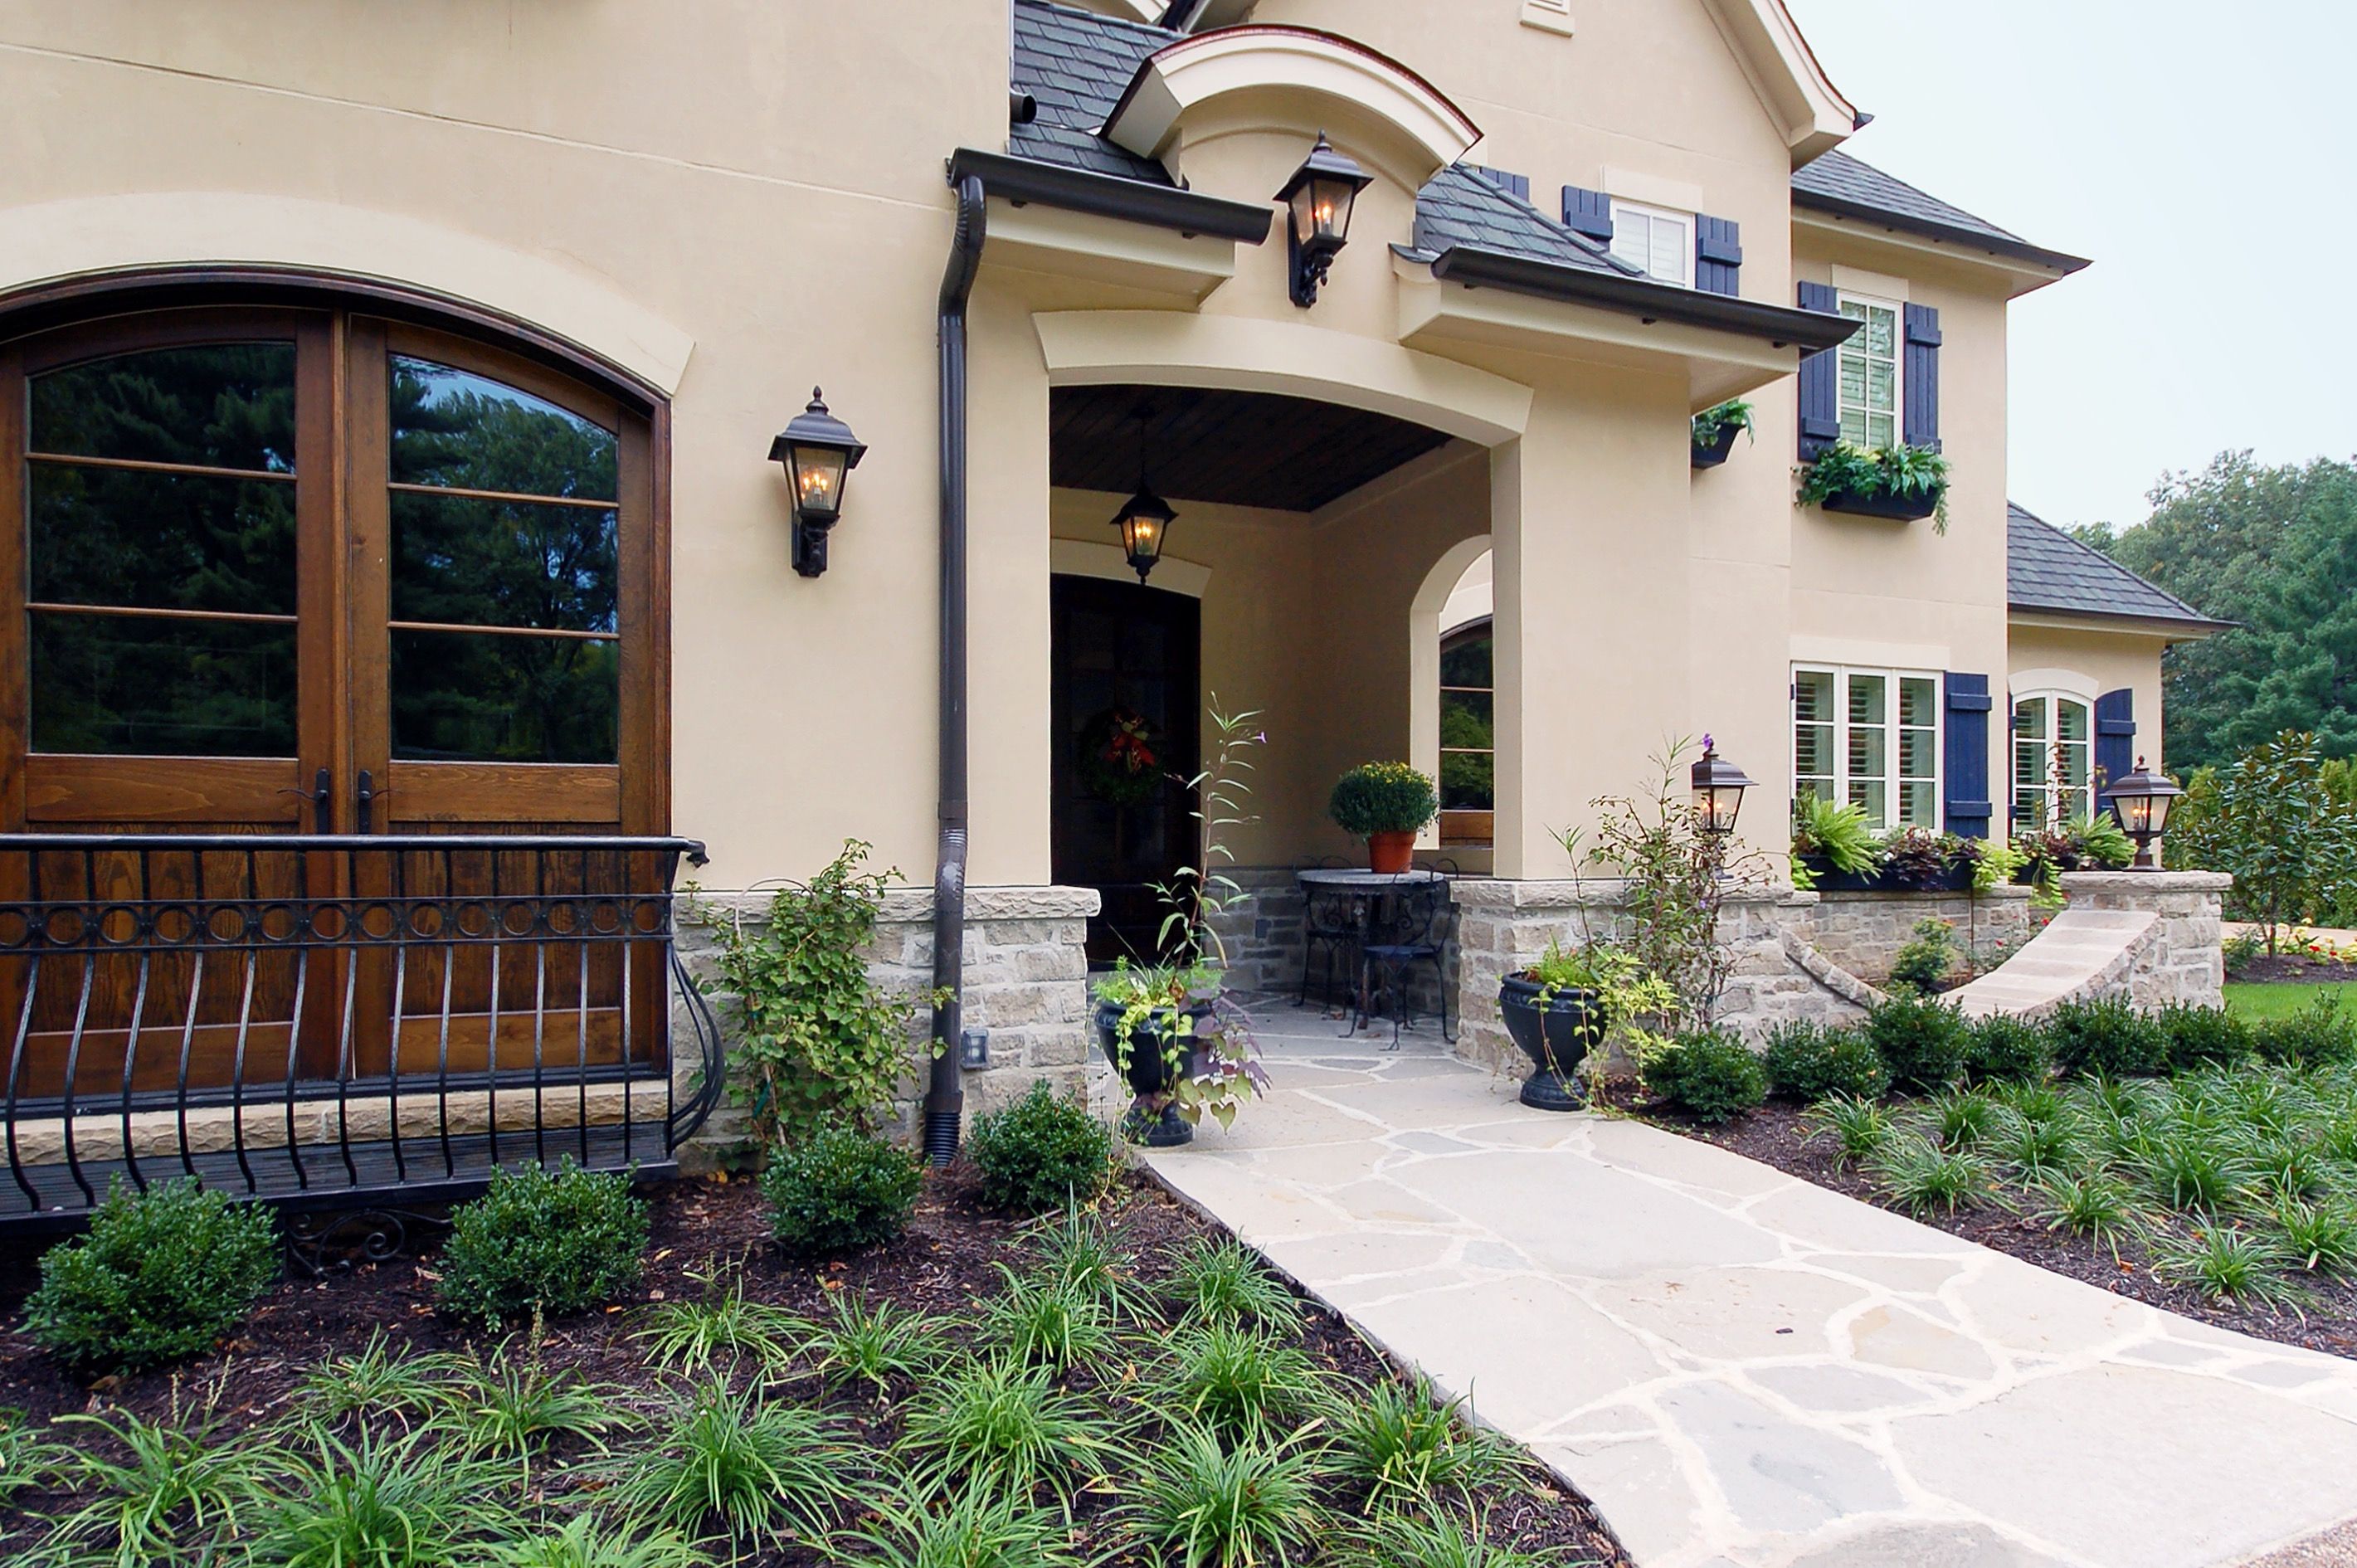 French Country Exterior Frontyard Design (Image 9 of 23)